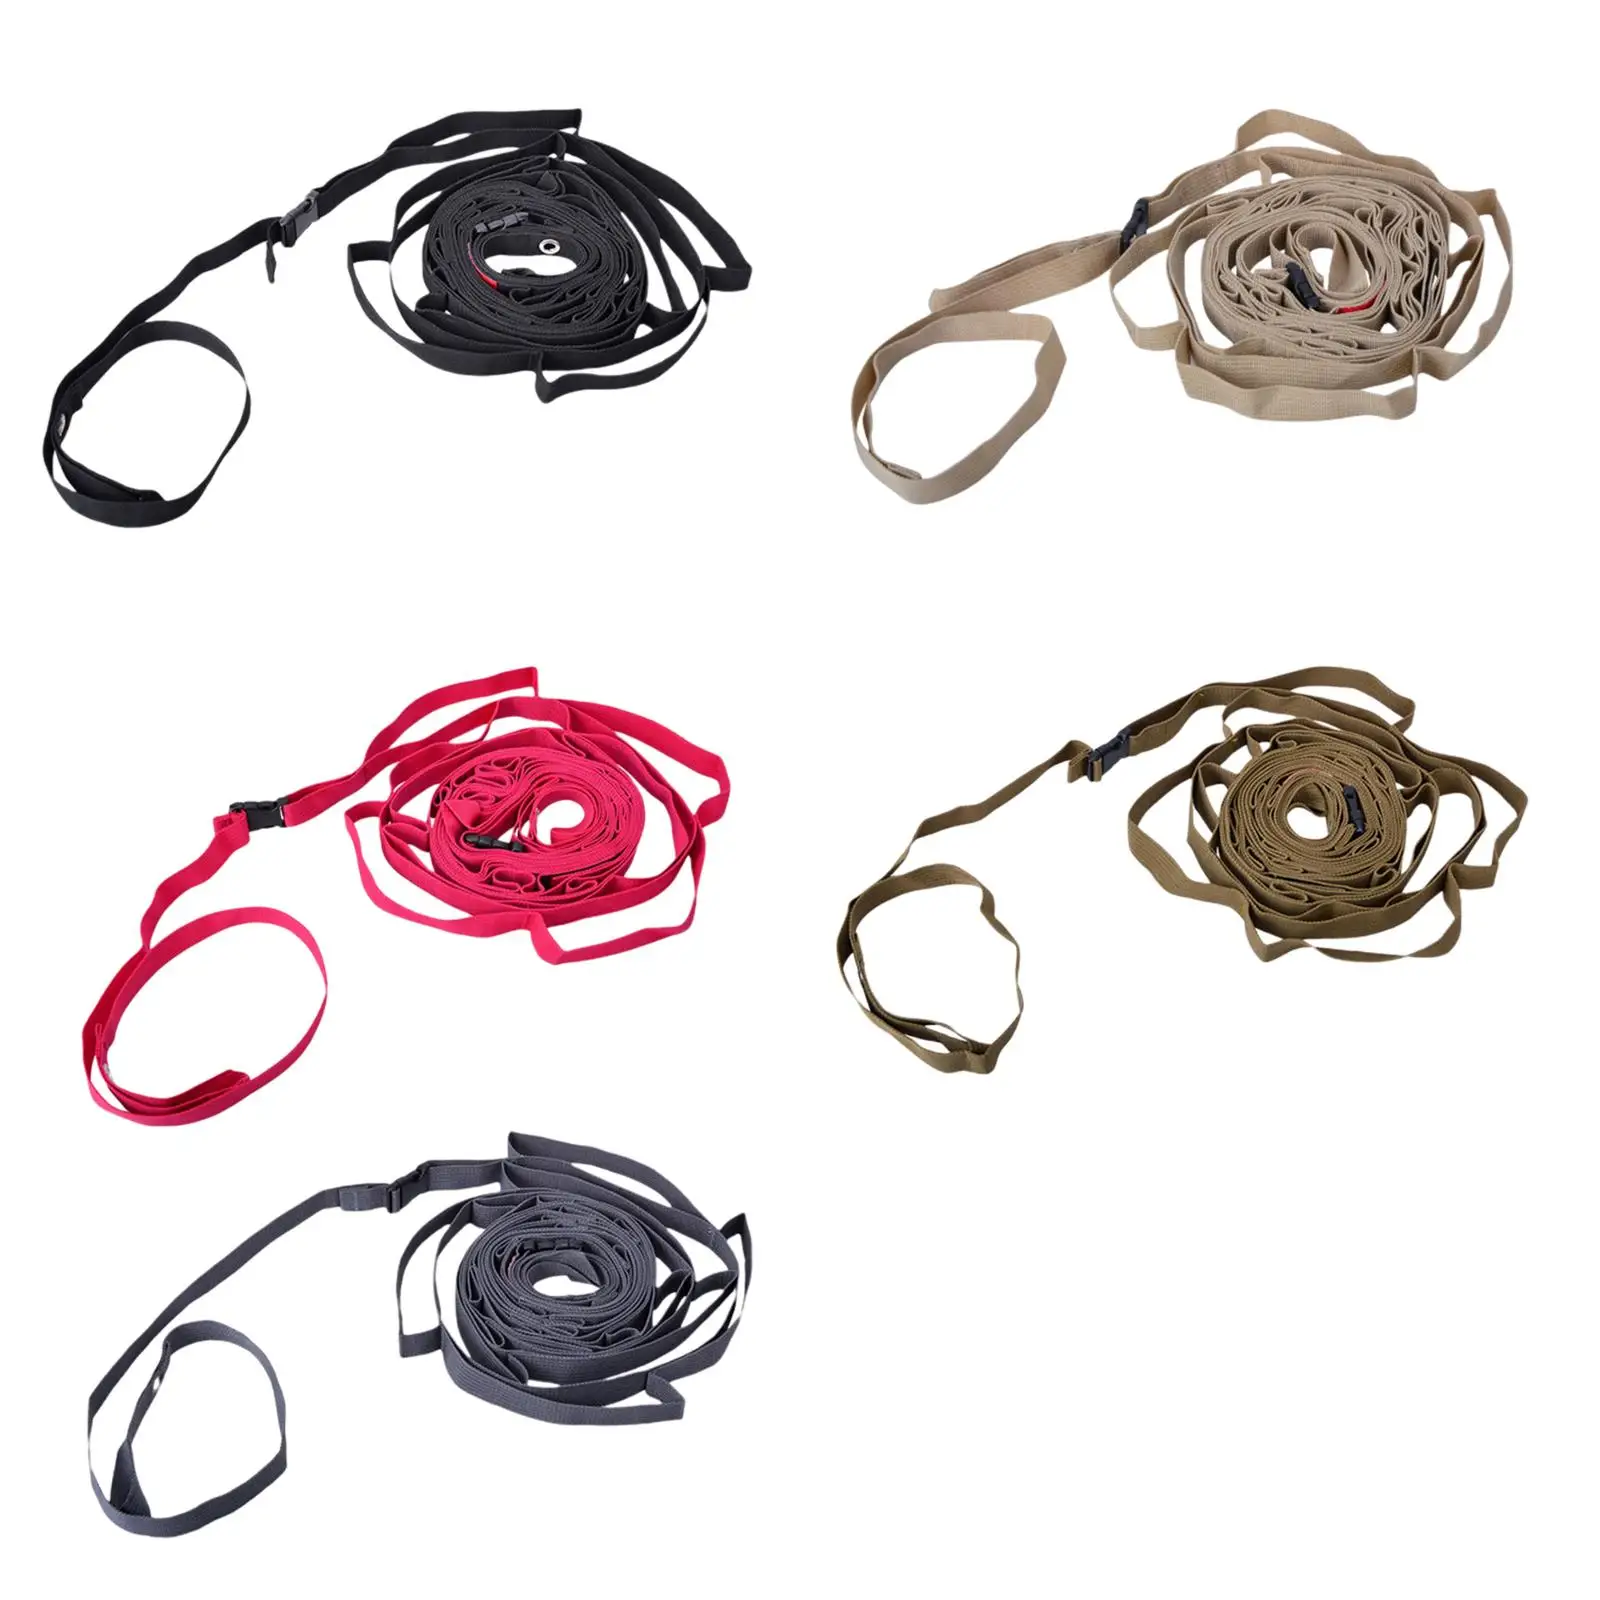 Camping Tent Rope Lanyard Clothesline Windproof Multifunction for Picnic Hiking Family